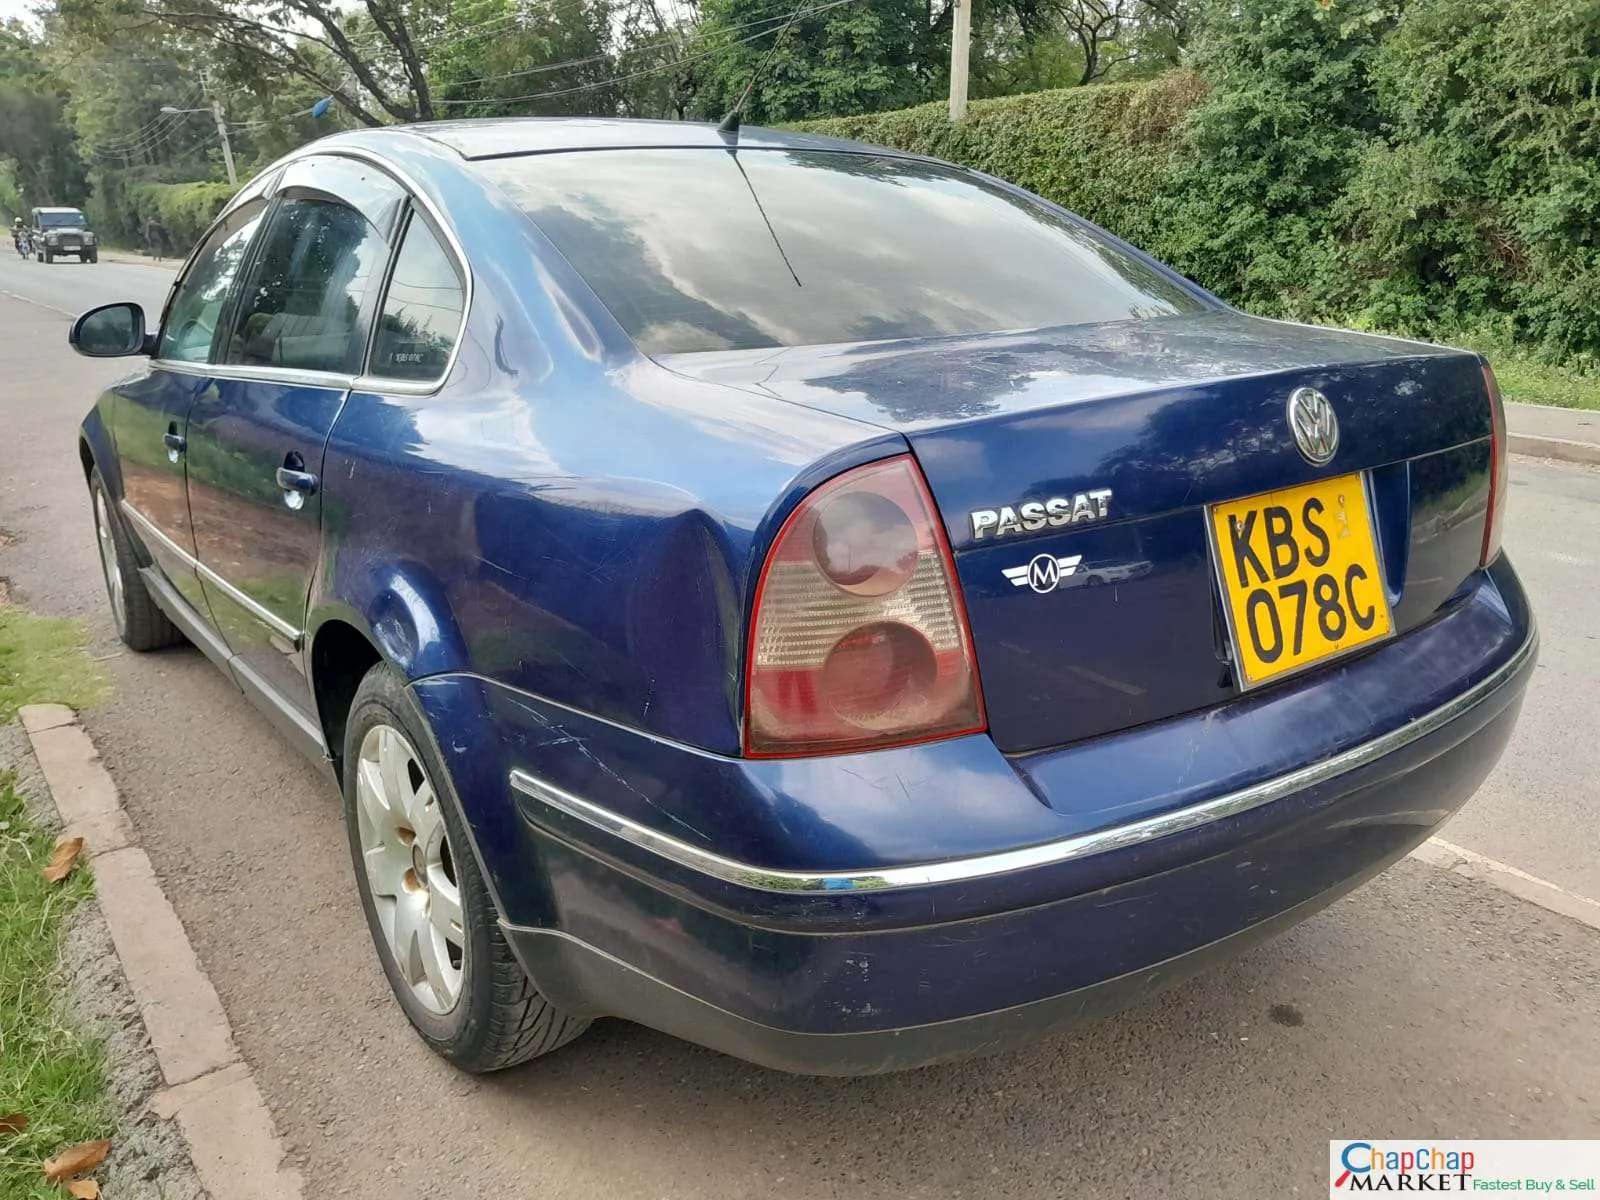 Volkswagen Passat for sale in Kenya QUICK SALE 🔥 You Pay 30% Deposit Trade in Ok EXCLUSIVE hire purchase installments bank finance Clean